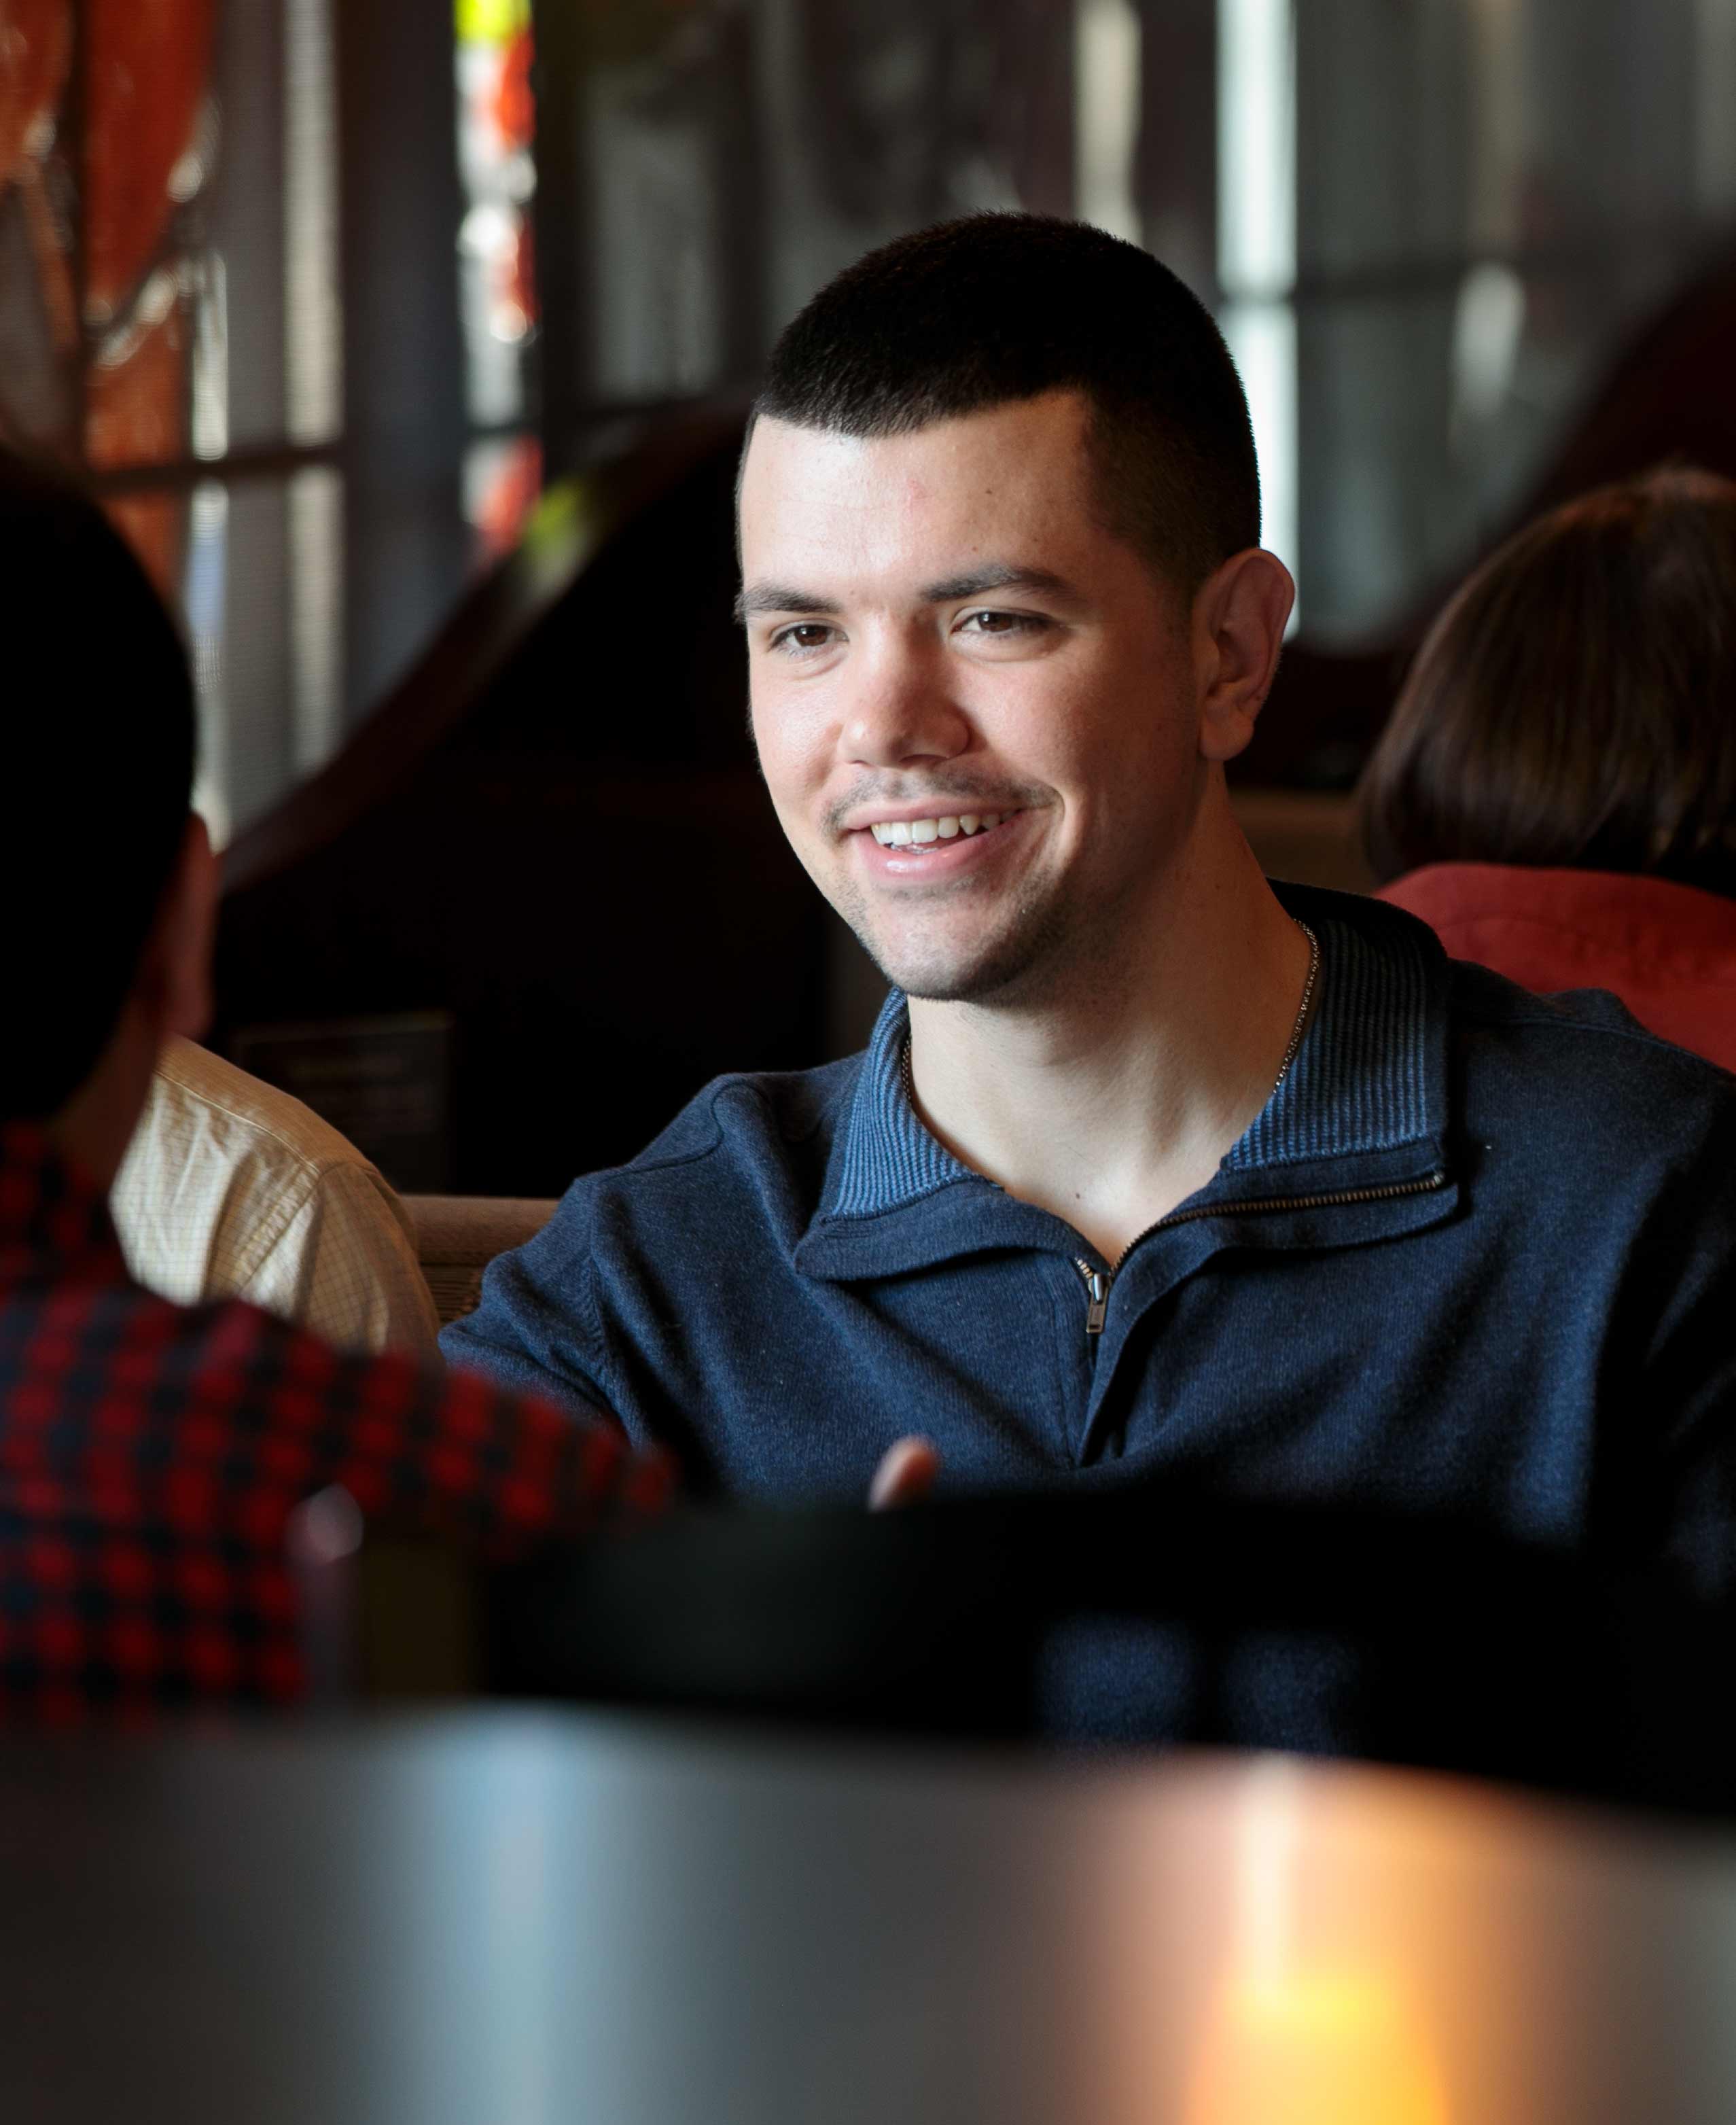 First-year Ohio Northern University College of Law student Matt Sharp studies at Cosi at Northern.